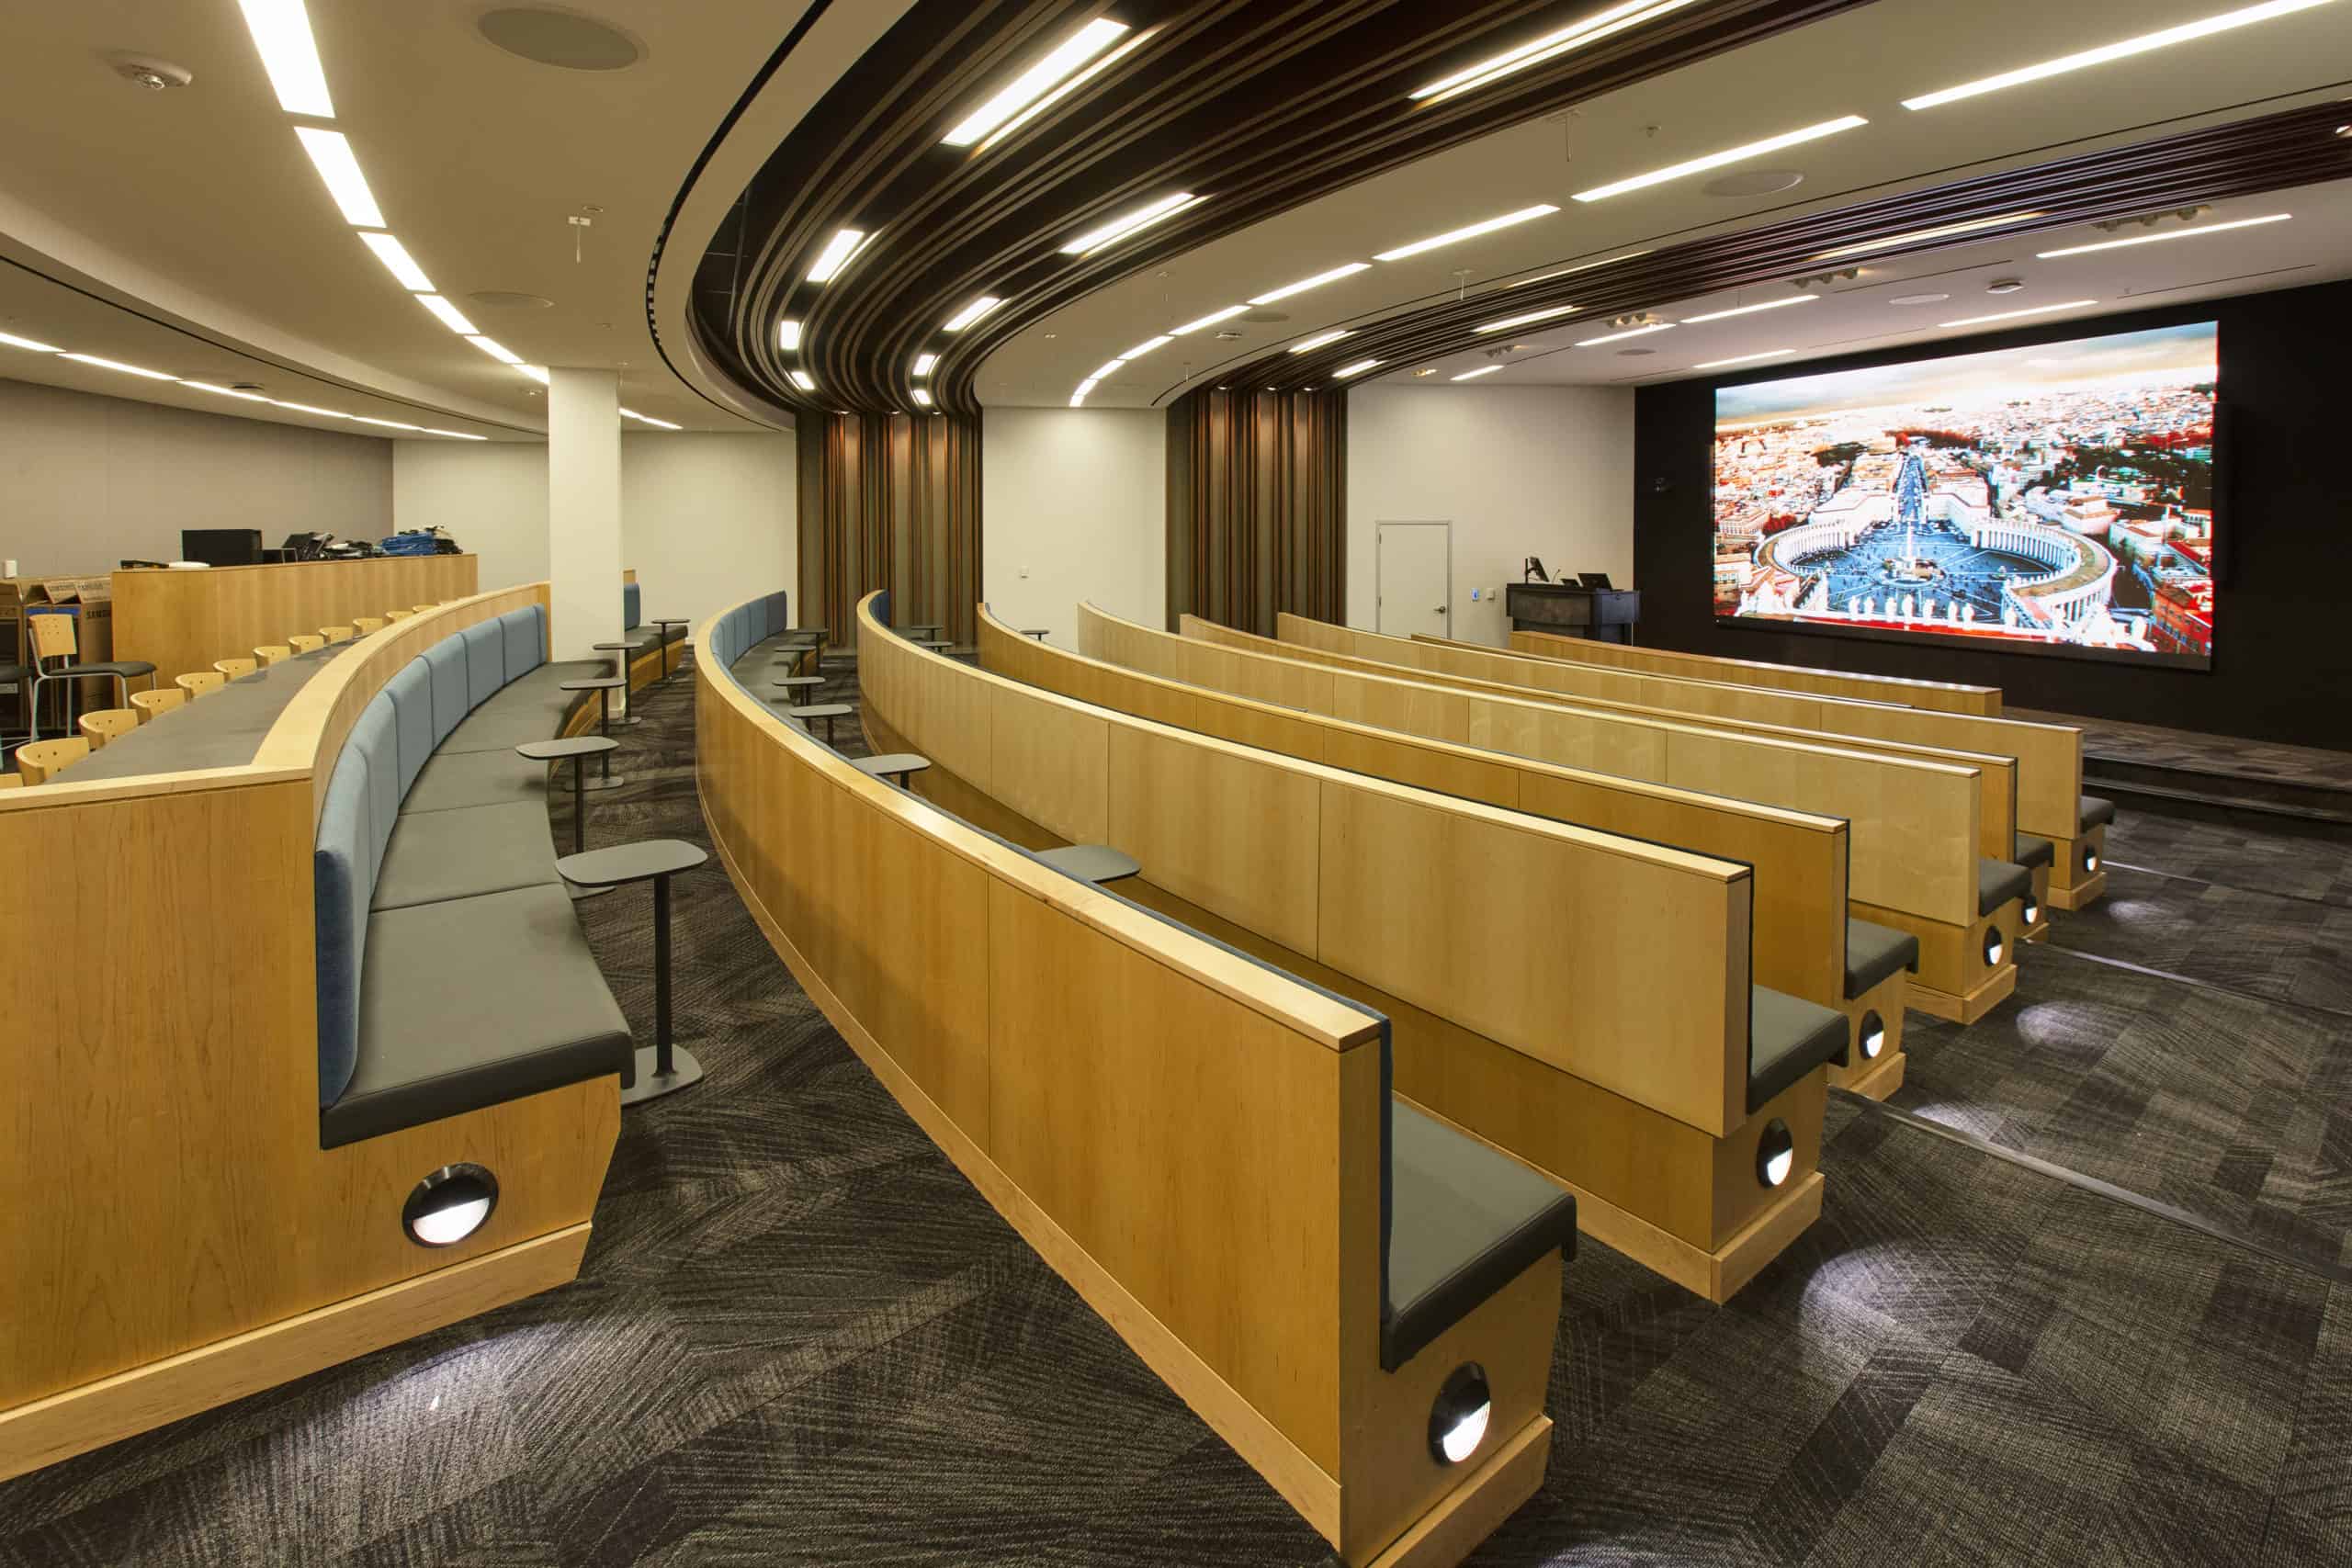 Kiewit auditorium with 220" Primeview LED wall